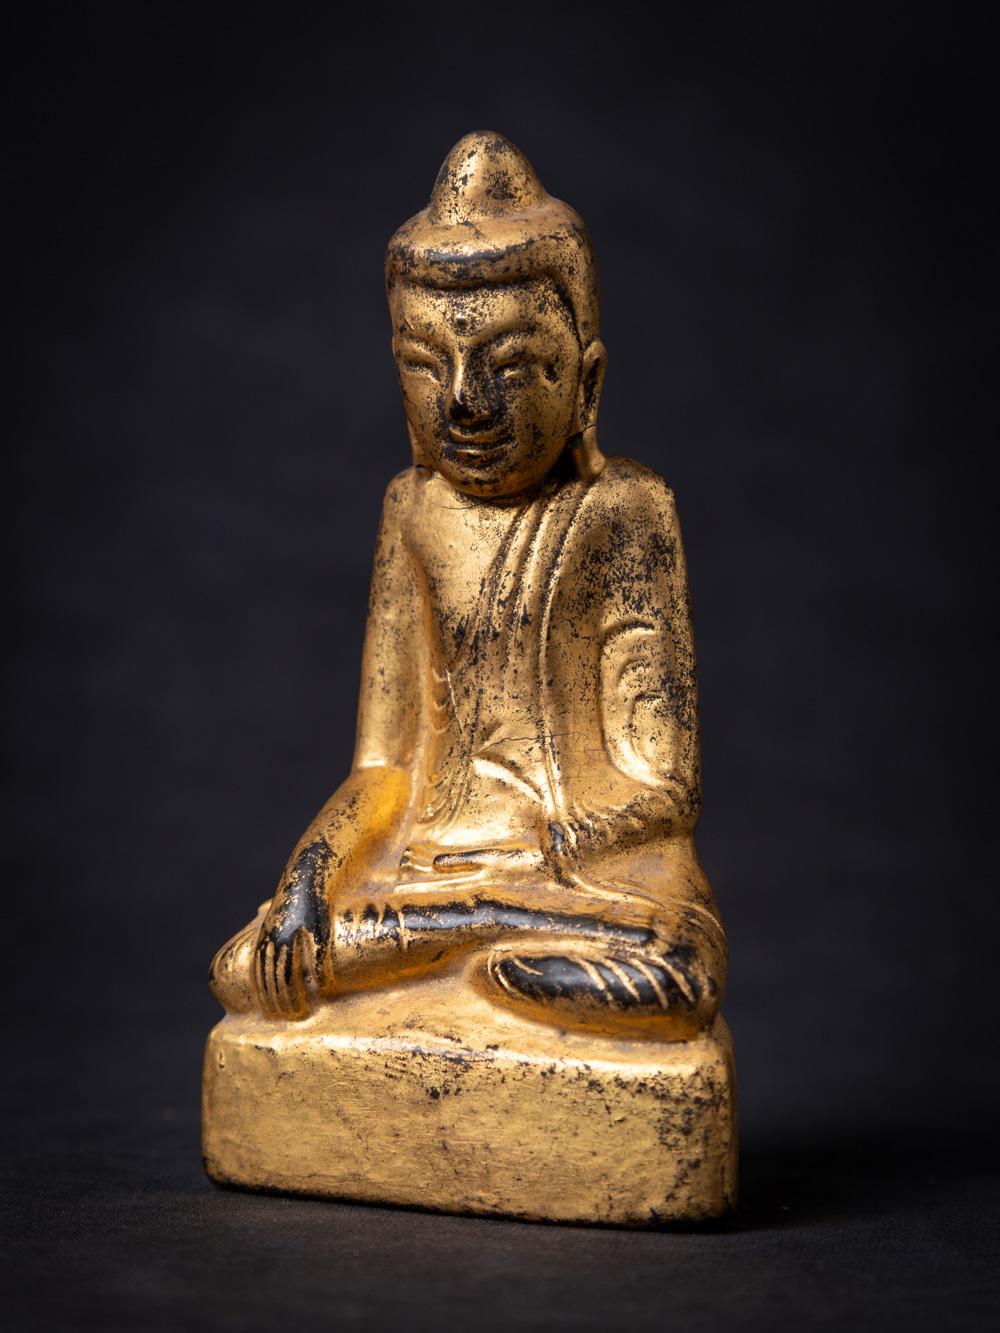 This exquisite wooden Buddha statue, hailing from 19th century Burma, is a true masterpiece of artistic and spiritual expression. Standing at a height of 13.4 cm with dimensions of 7 cm in width and 3.7 cm in depth, this statue exudes a sense of